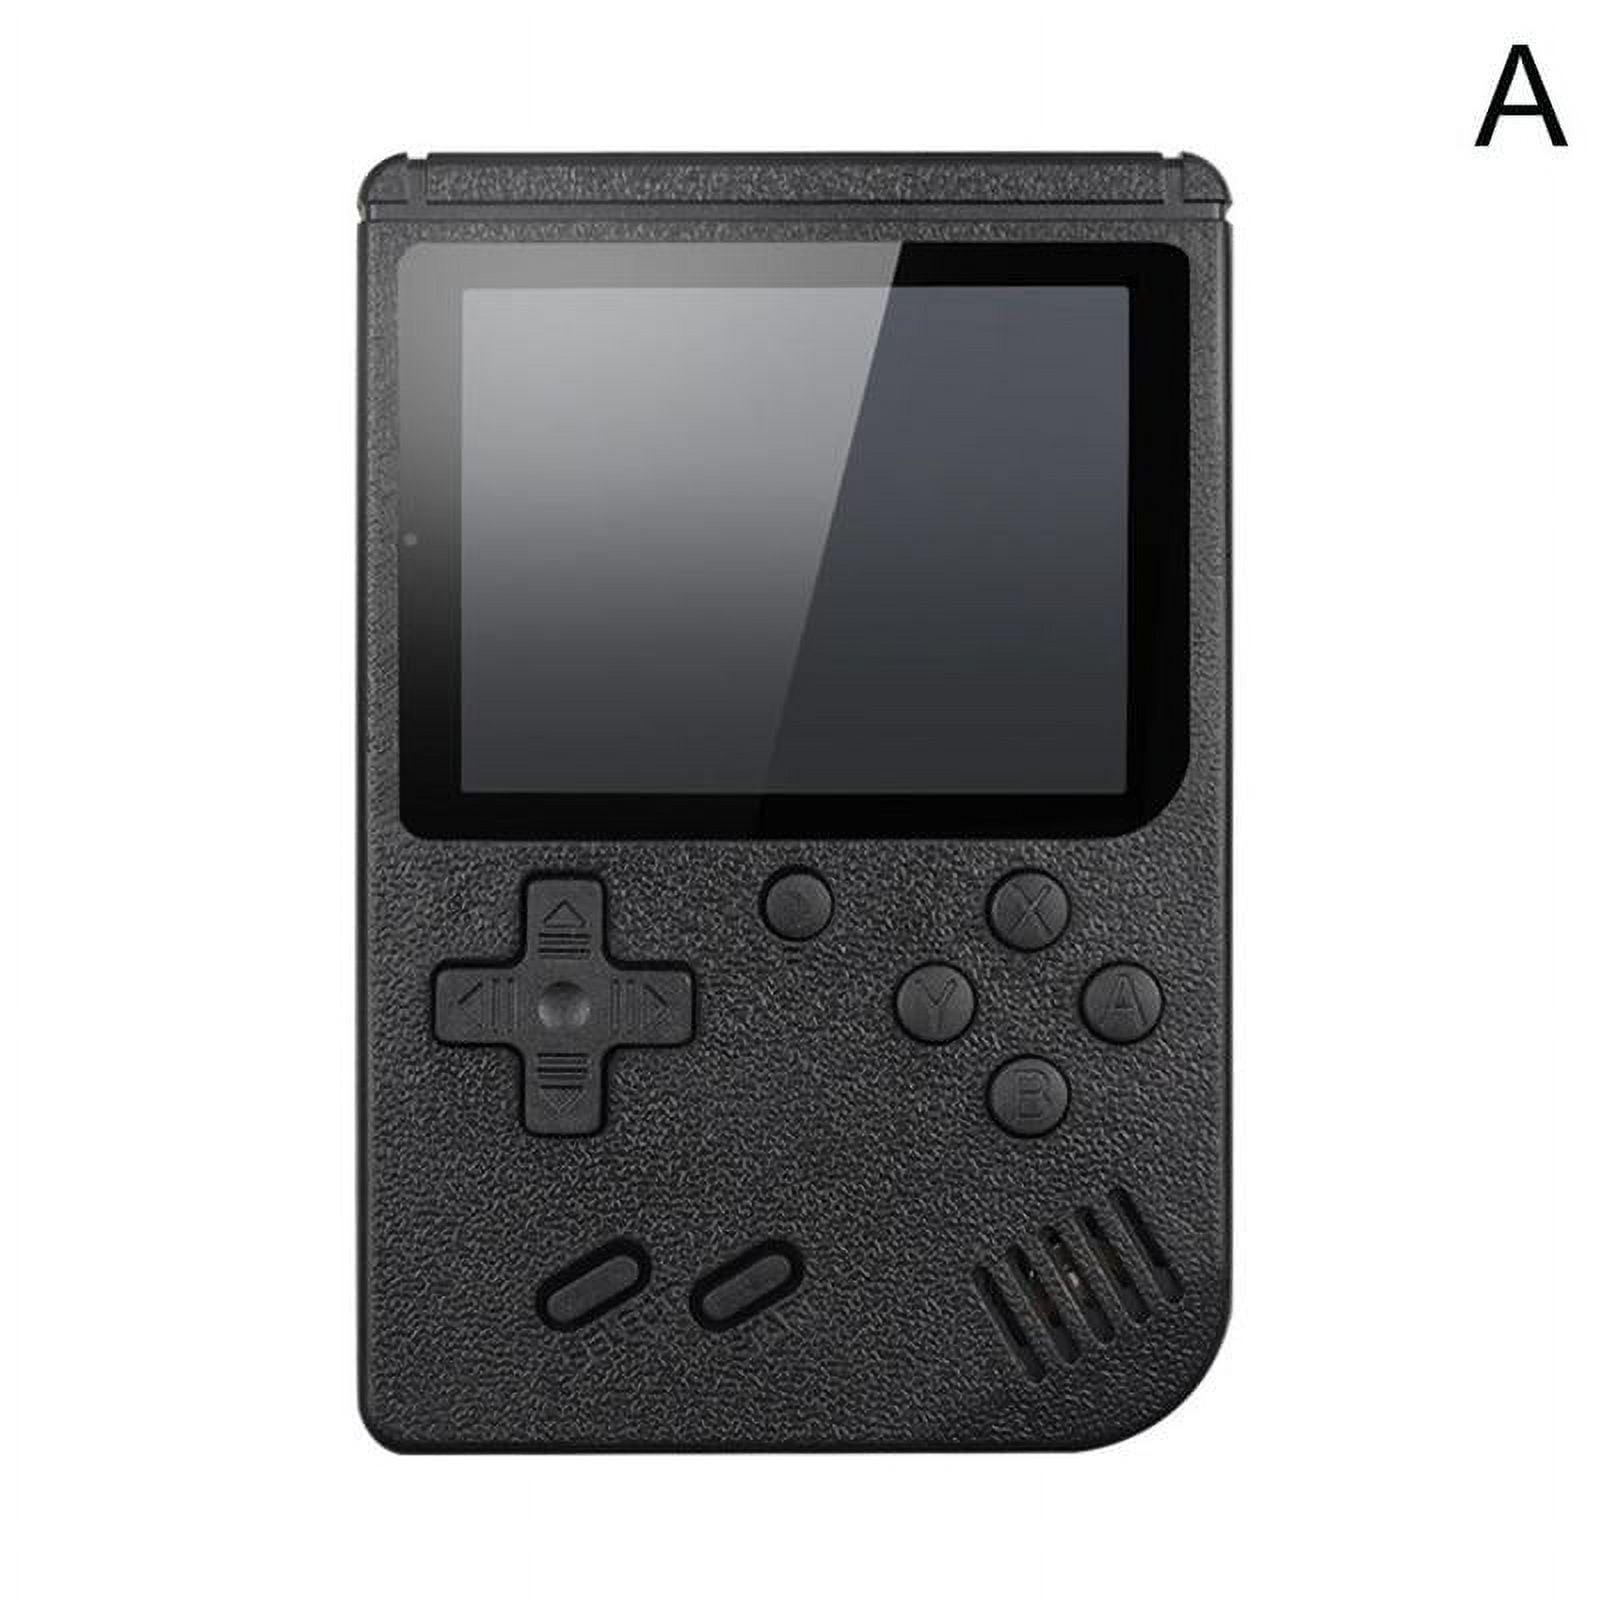 400 In 1 Portable Retro Game Console Handheld Game Advance Players Boy 8  Bit Gameboy 3.0 Inch LCD Sreen Support 2 Players E7A6